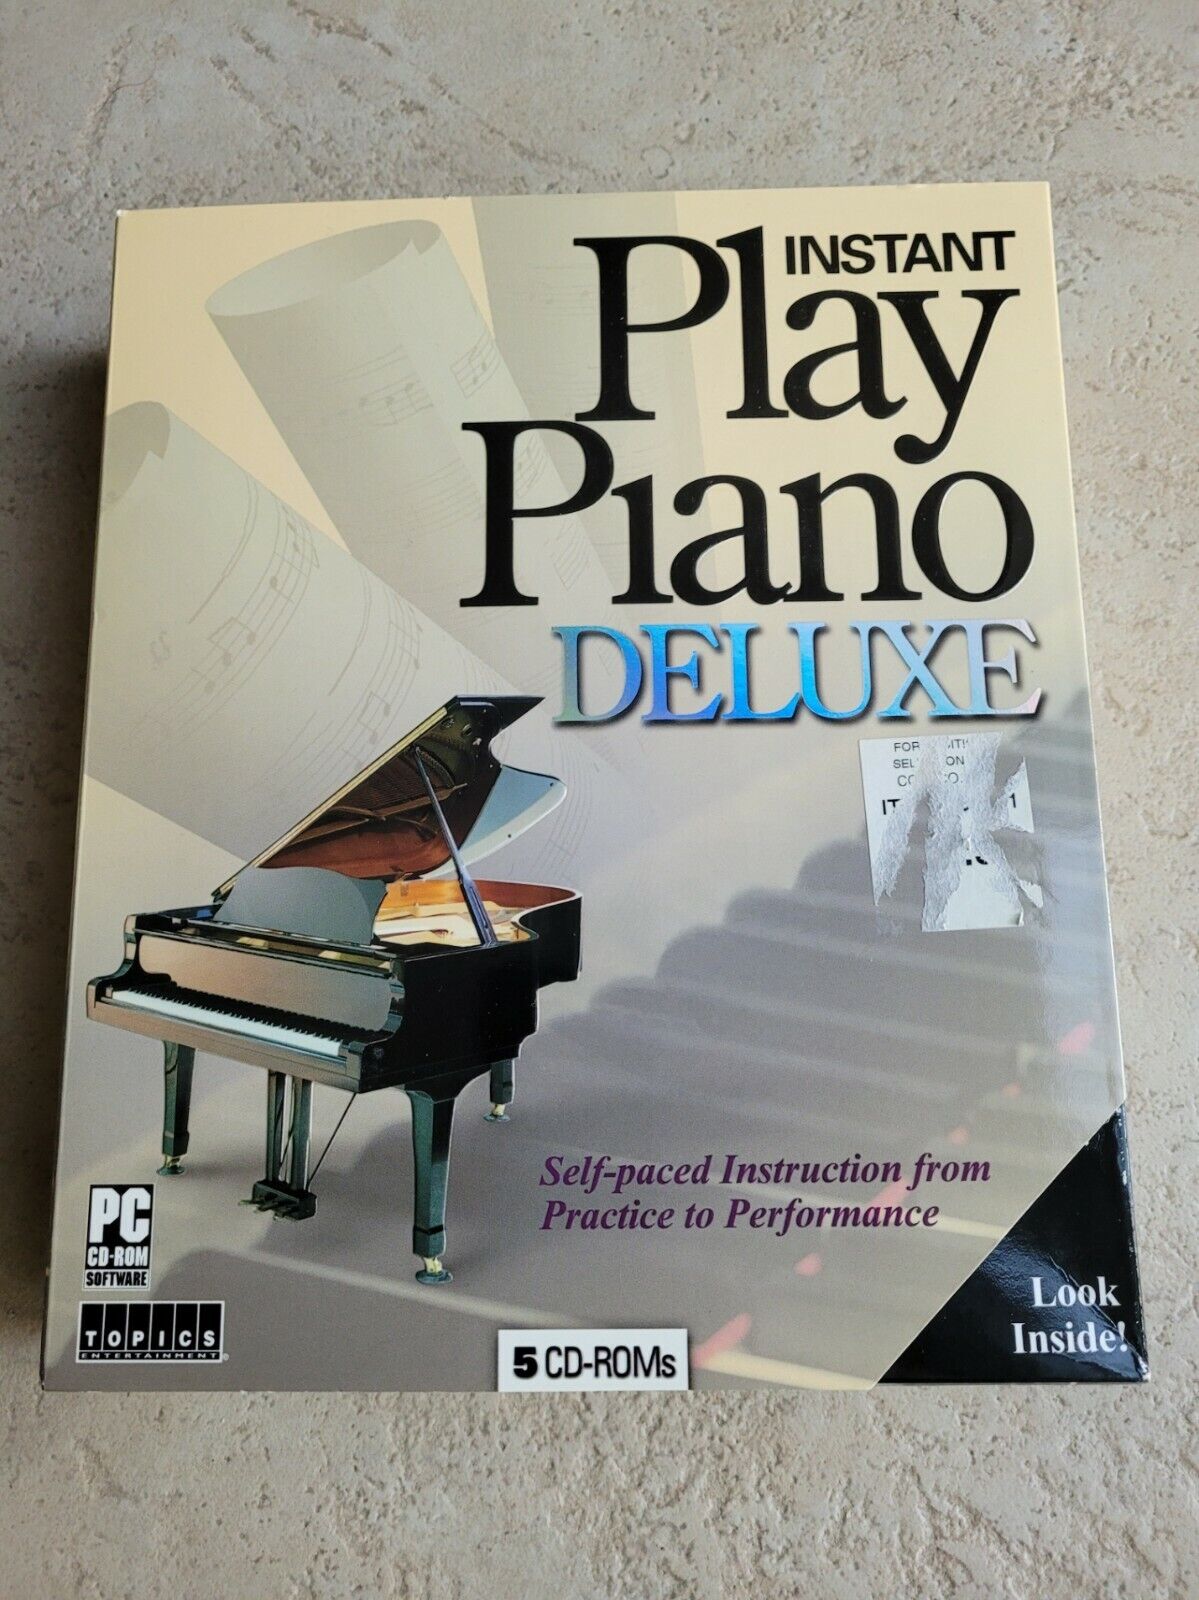 Instant Learn To Play Piano Deluxe (CD-ROMs)